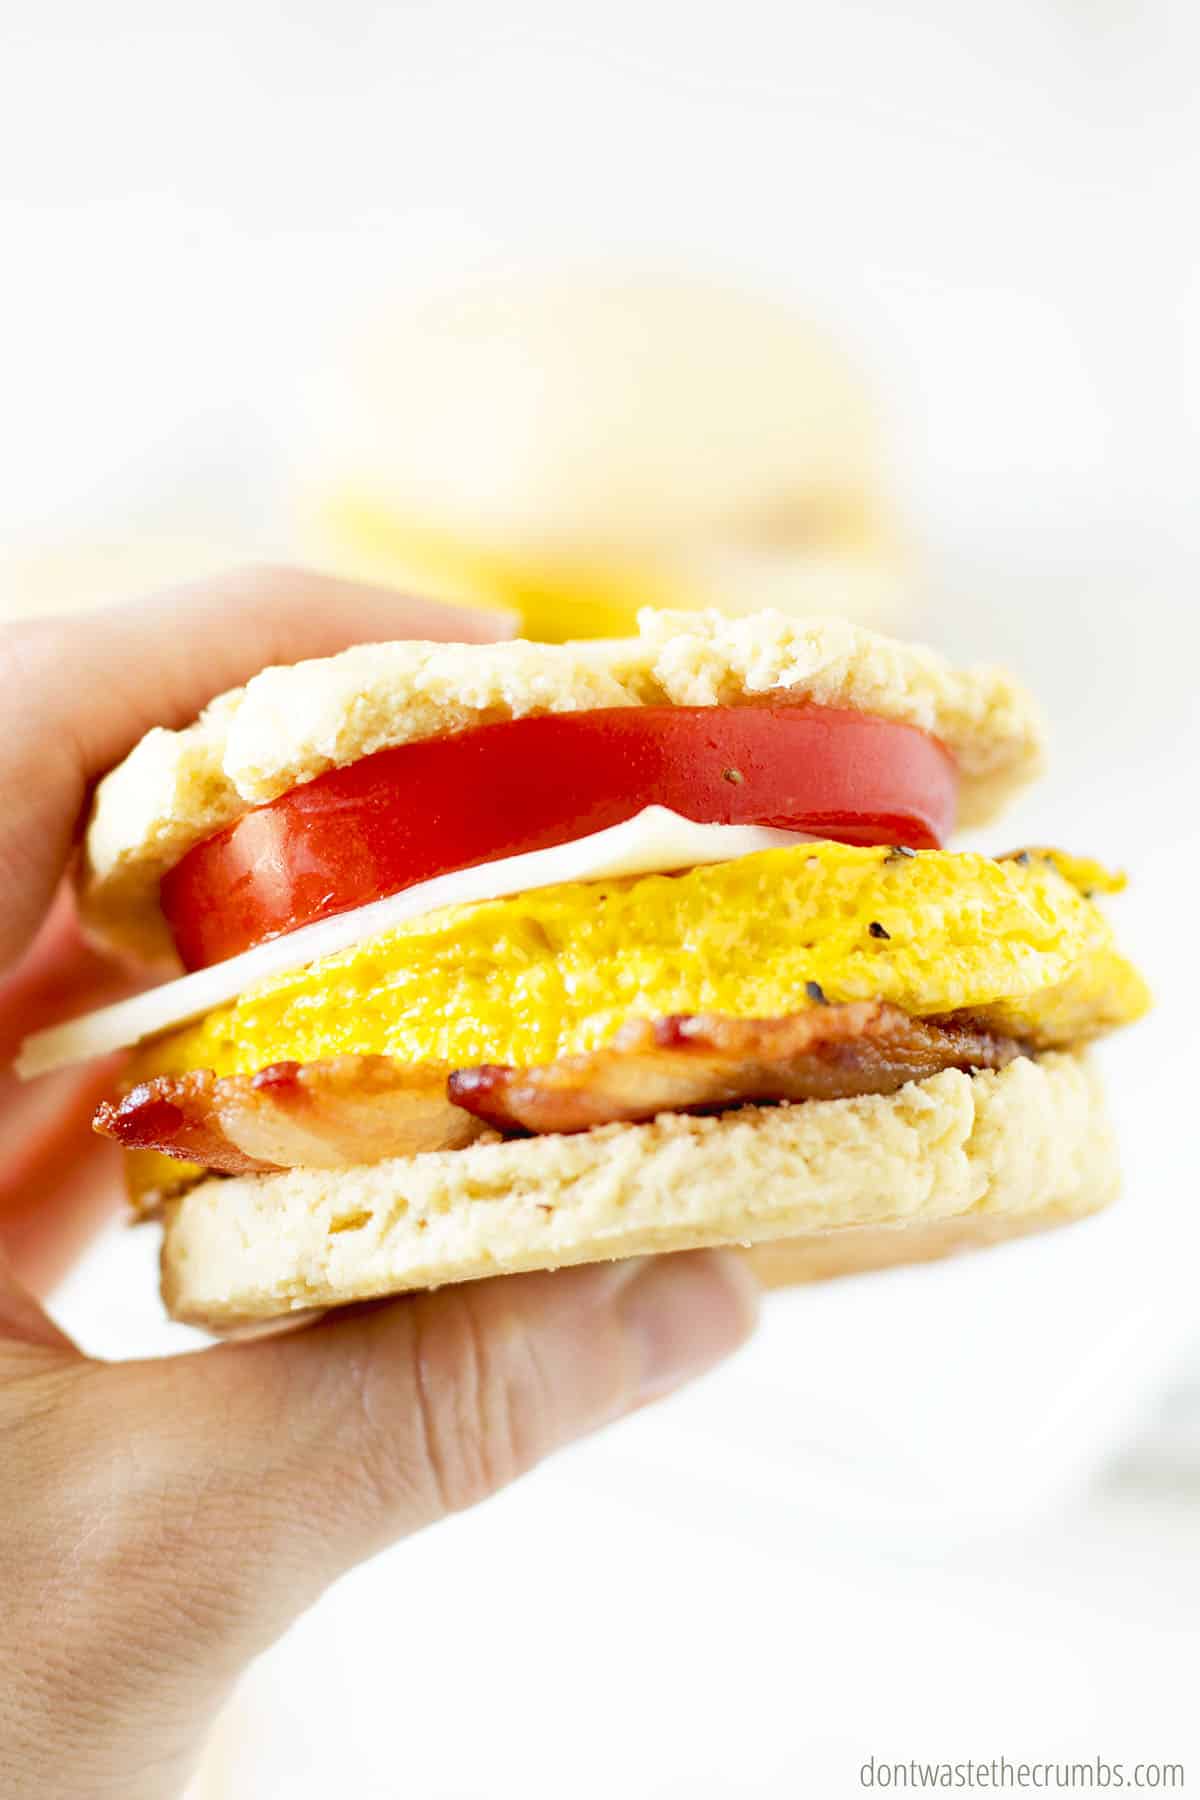 Close up view of a hand holding a breakfast sandwich.